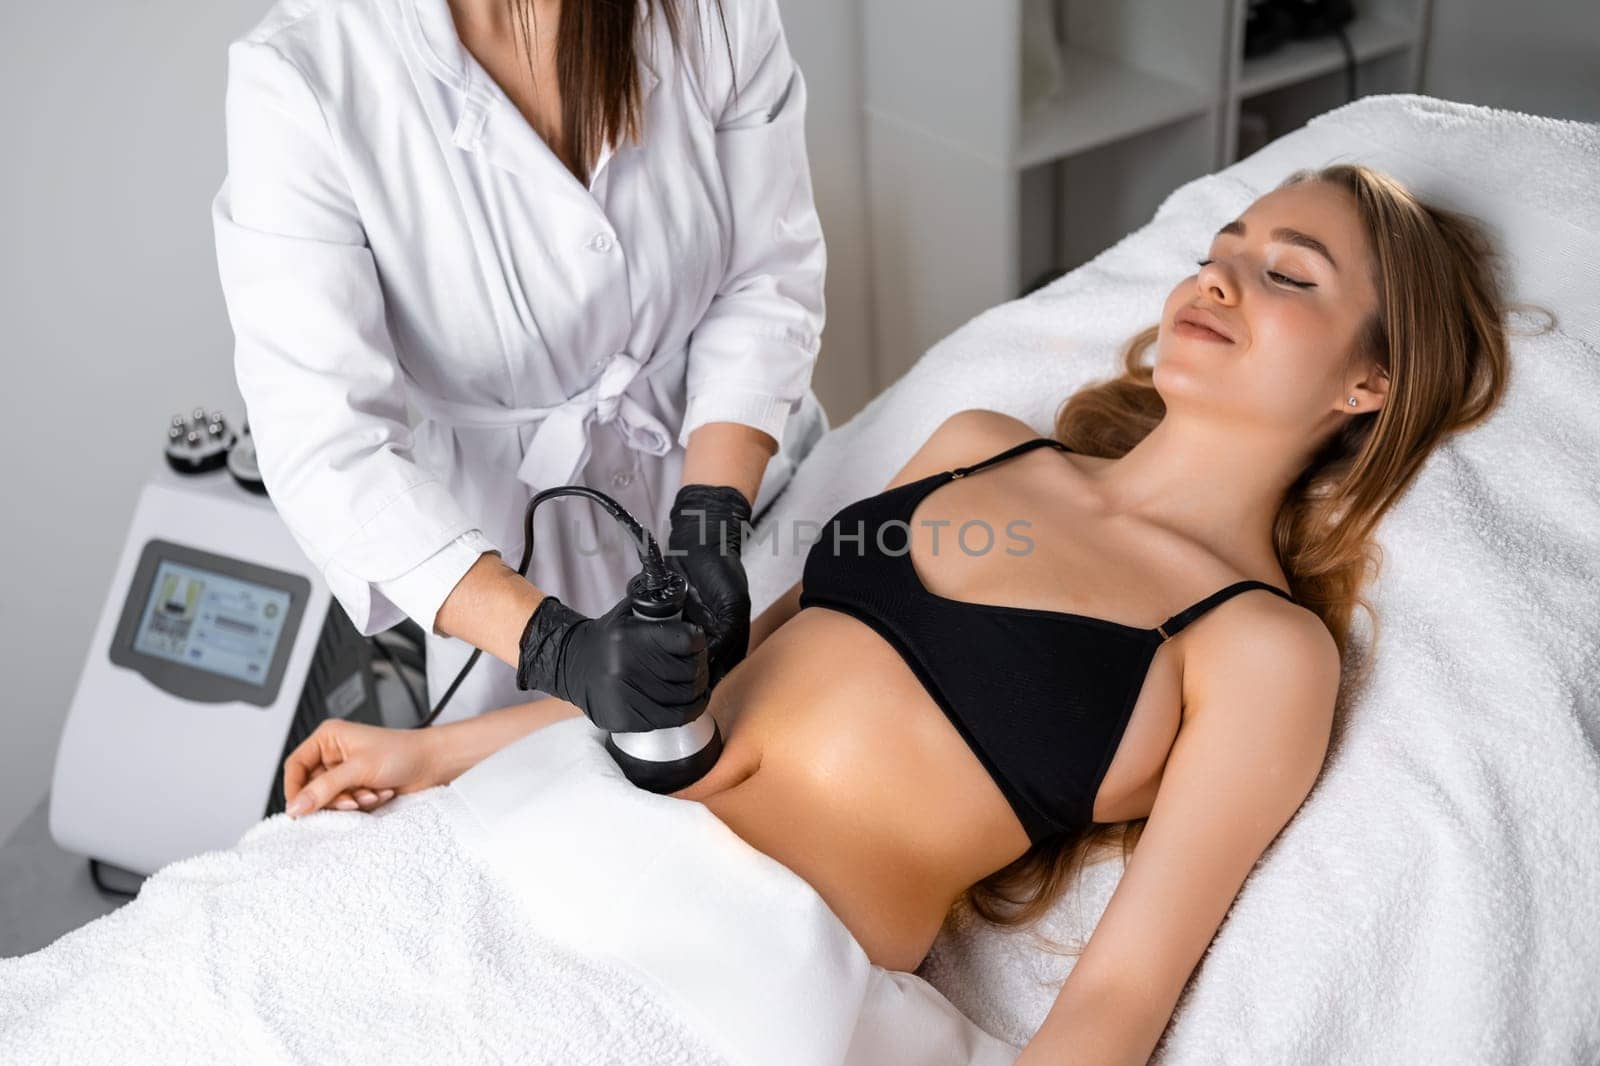 Young woman getting ultrasound cavitation body contouring treatment and anti cellulite therapy. Hardware cosmetology for body sculpting.